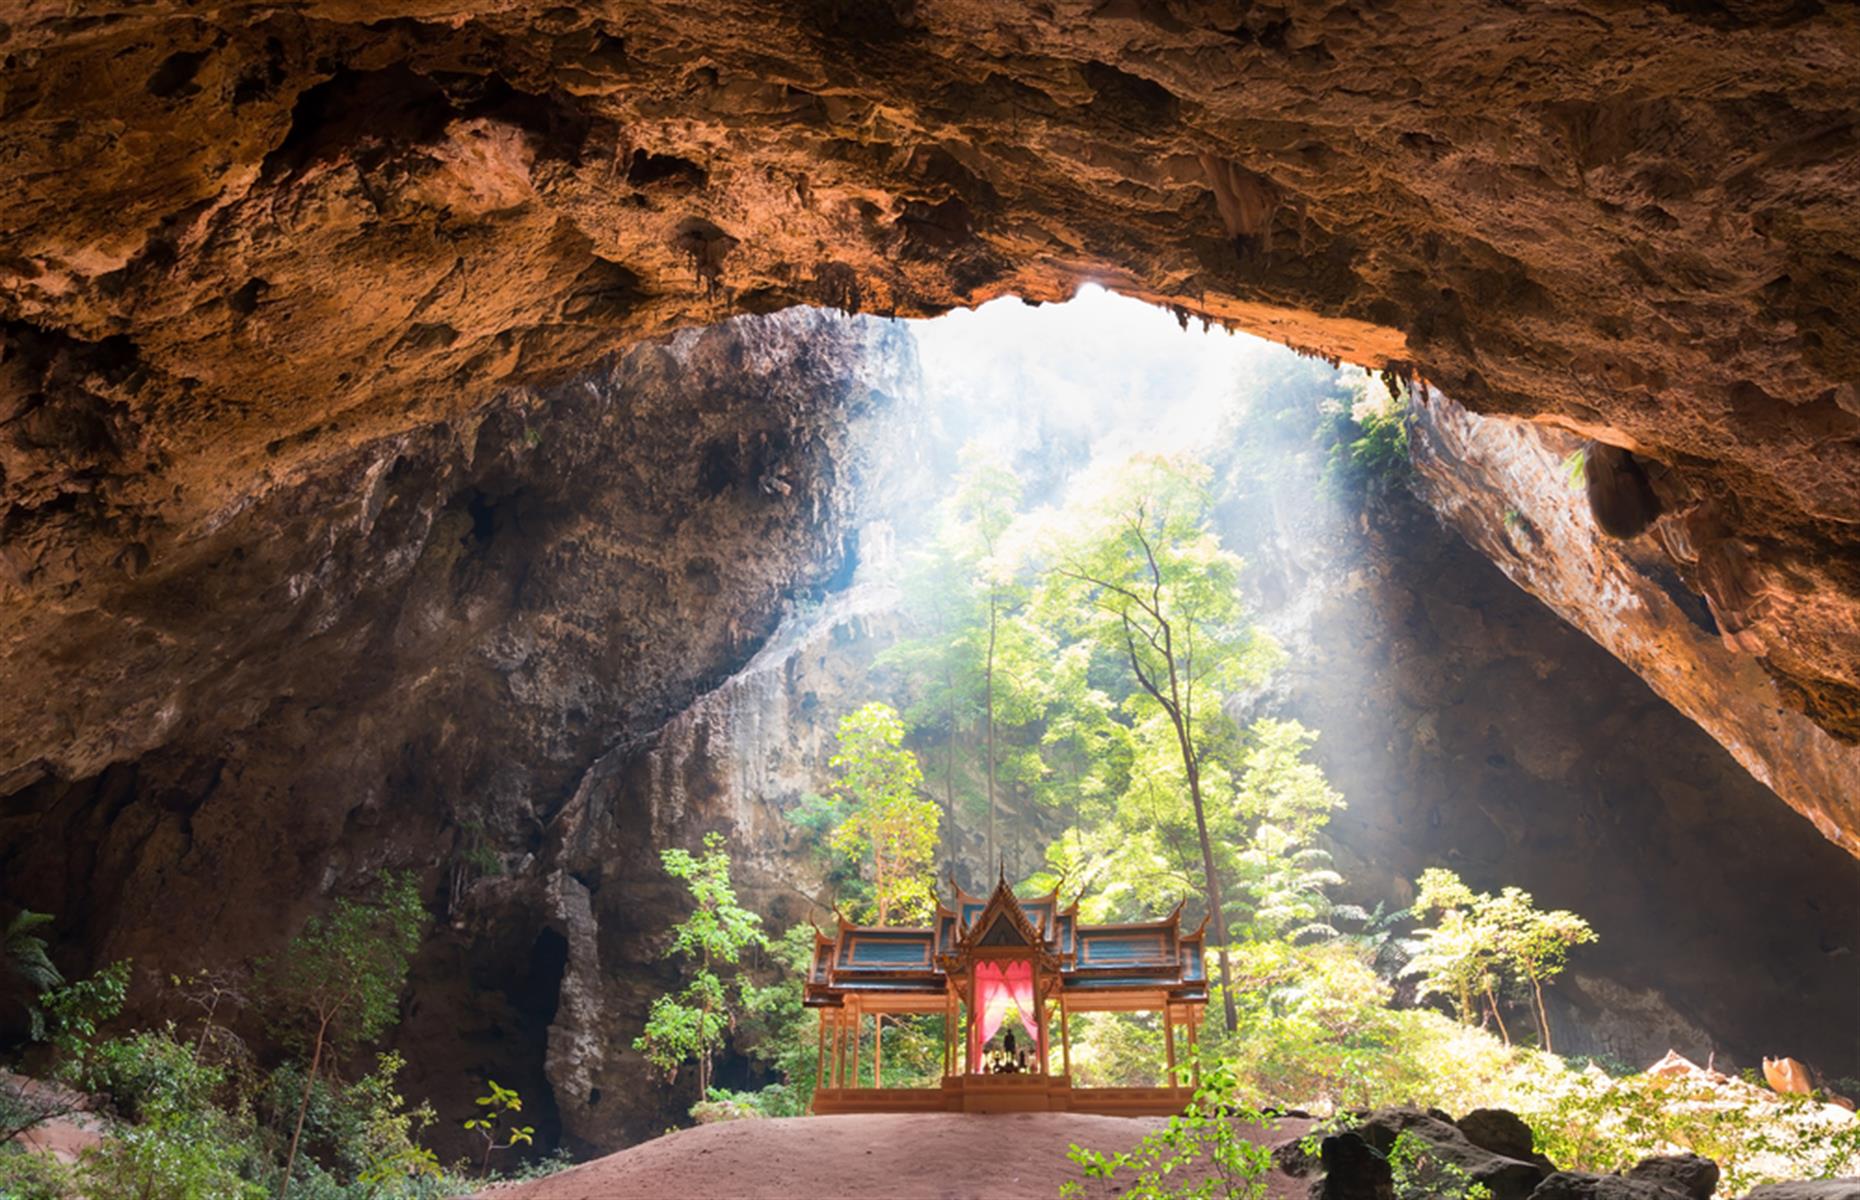 <p>Phraya Nakhon Cave in Khao Sam Roi Yot National Park is spectacular in its own right, but it's the little pavilion bathed in light inside which really makes it special. Want to visit? You've got quite the trek ahead of you: a boat ride, 1,450 feet (442m) of uneven and steep steps, then a slippery pathway into the cavern. Start early, the light in this beautiful cave looks best in the morning.</p>